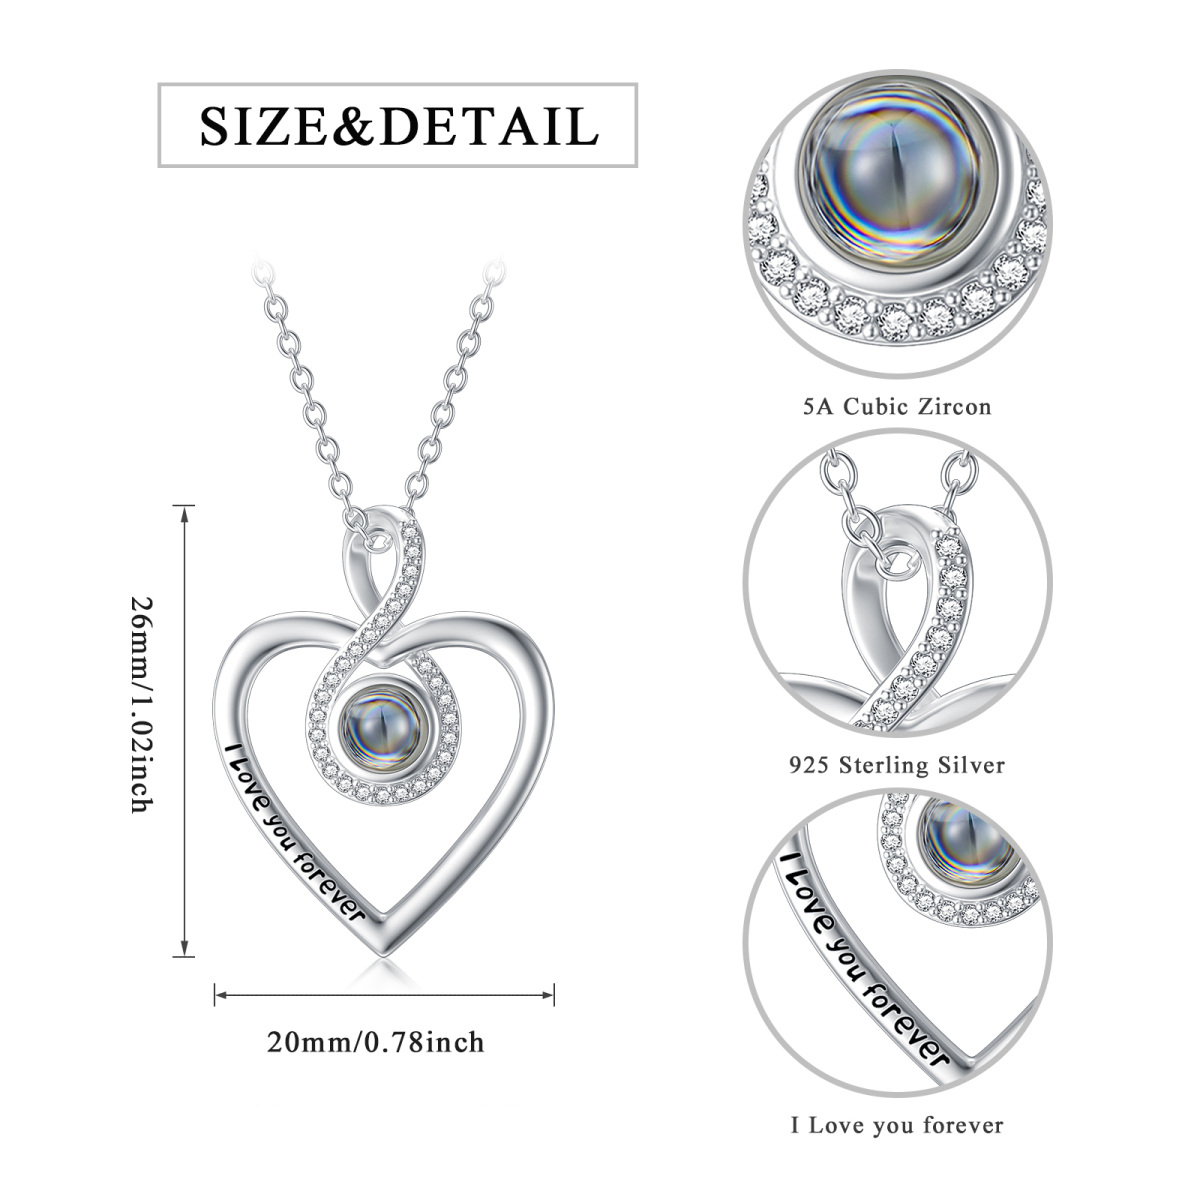 Sterling Silver Projection Stone & Personalized Projection Personalized Photo & Heart & Infinity Symbol Pendant Necklace with Engraved Word-5